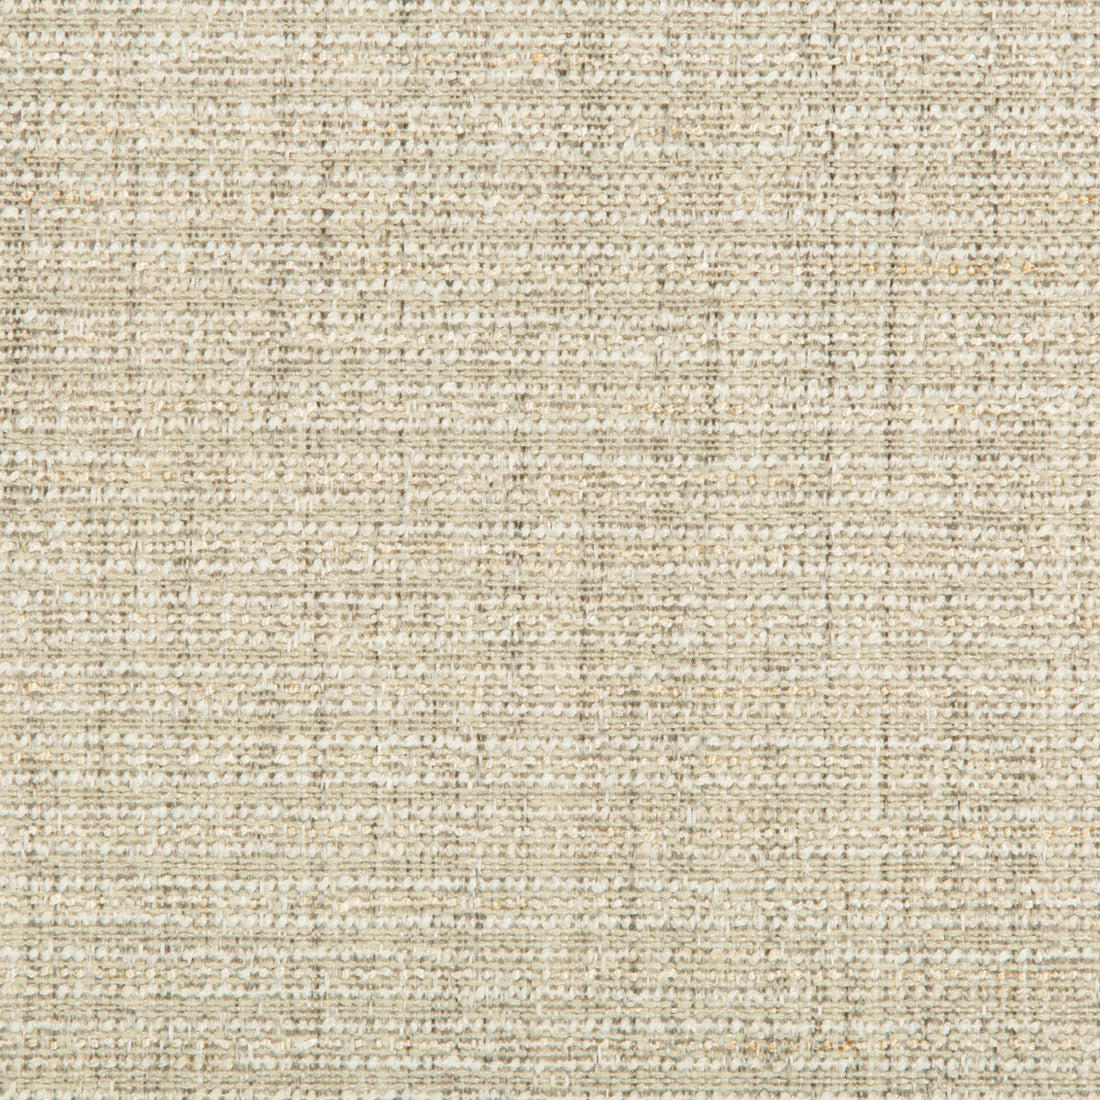 Kravet Contract fabric in 35410-1123 color - pattern 35410.1123.0 - by Kravet Contract in the Crypton Incase collection